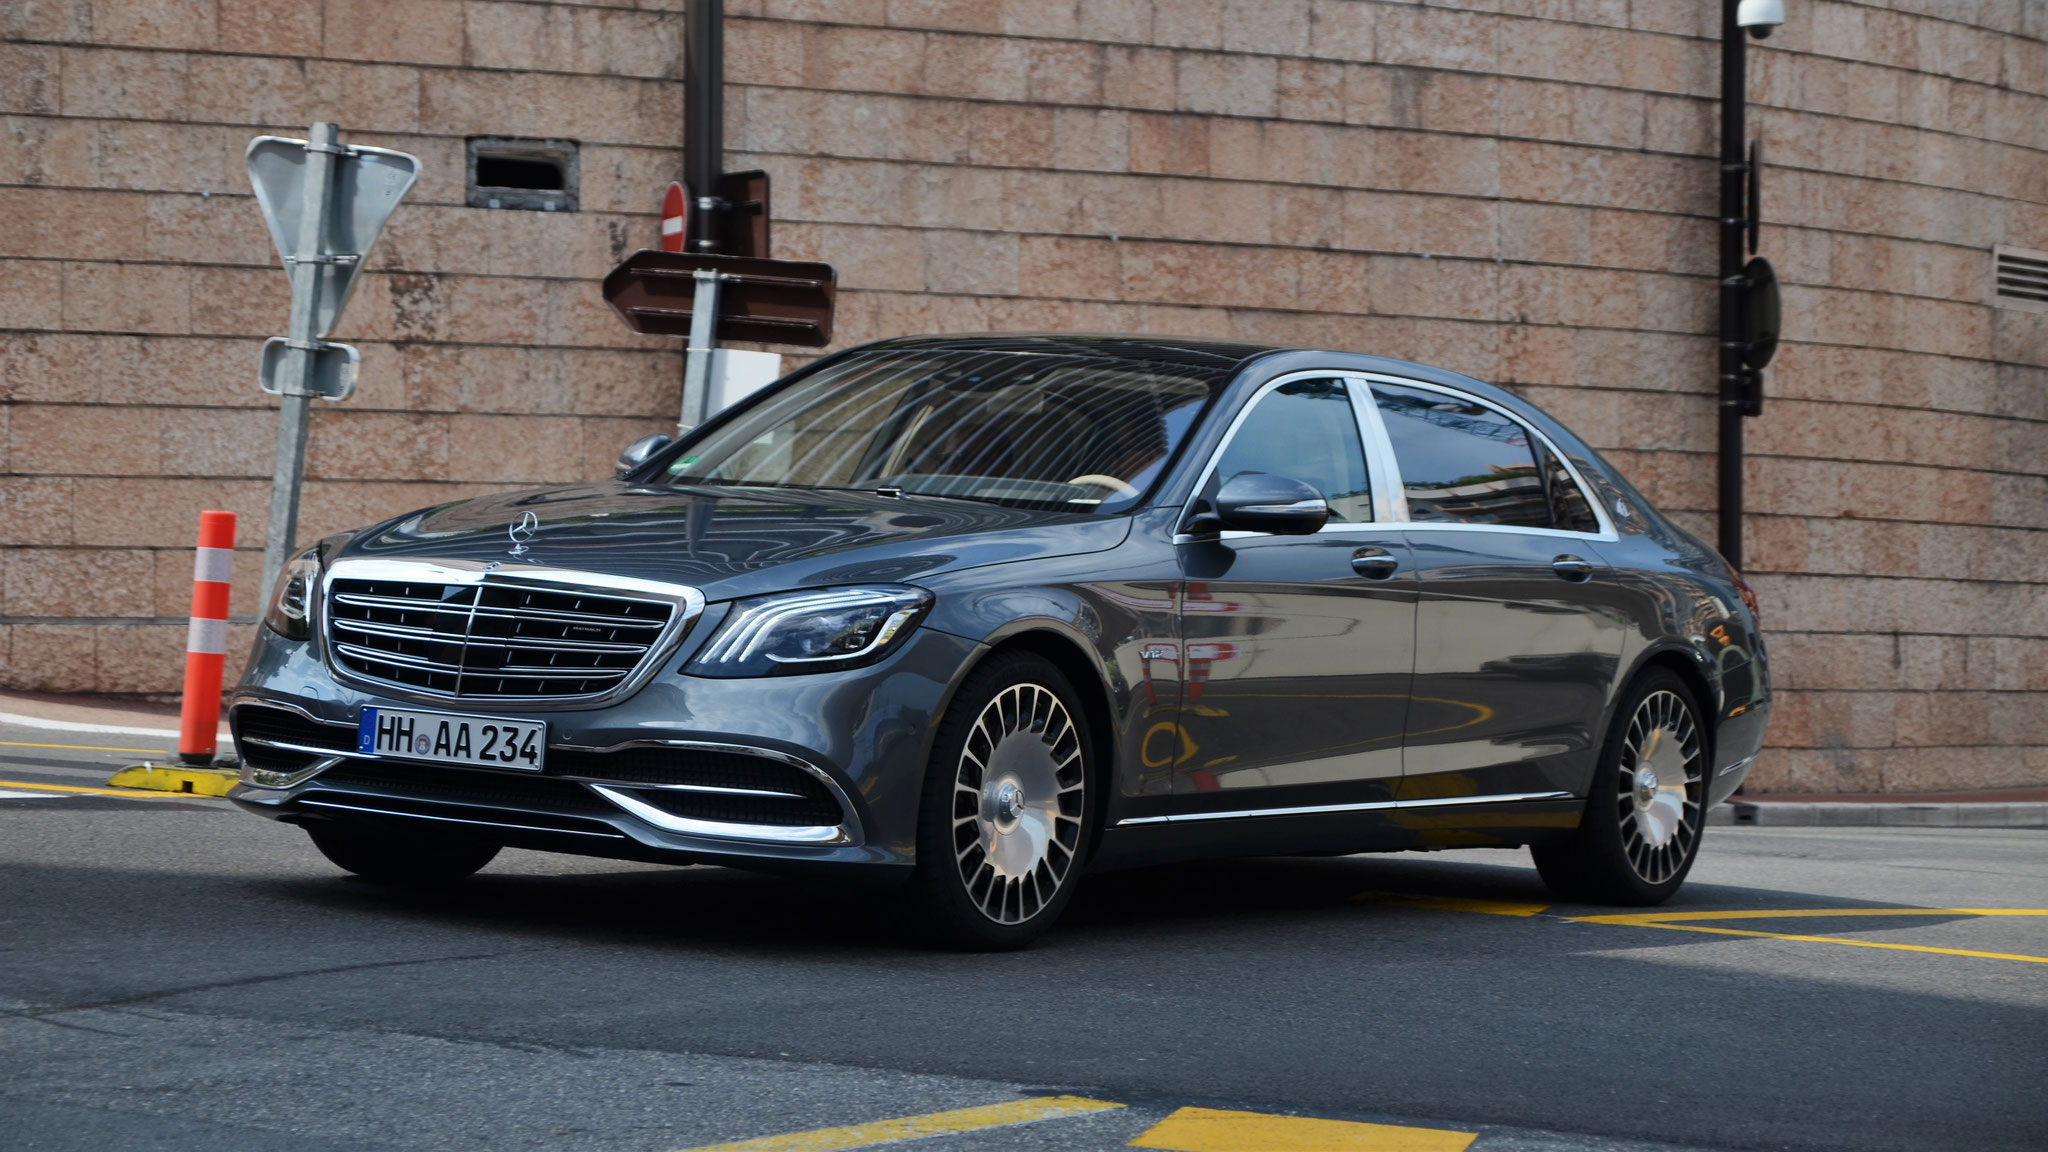 Mercedes Maybach S600 - HH-AA-234